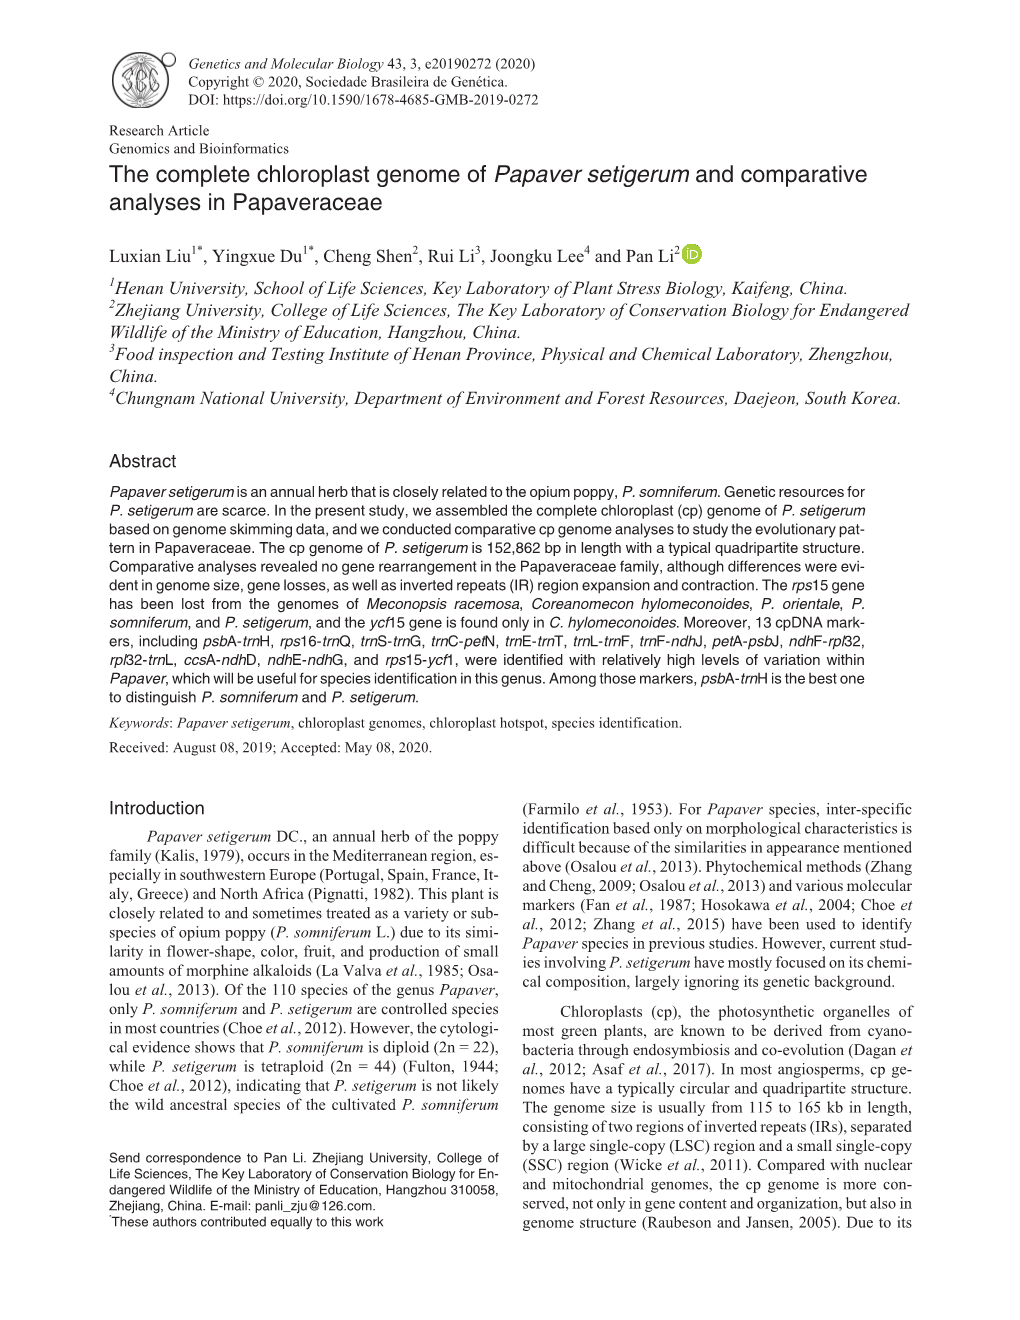 The Complete Chloroplast Genome of Papaver Setigerum and Comparative Analyses in Papaveraceae